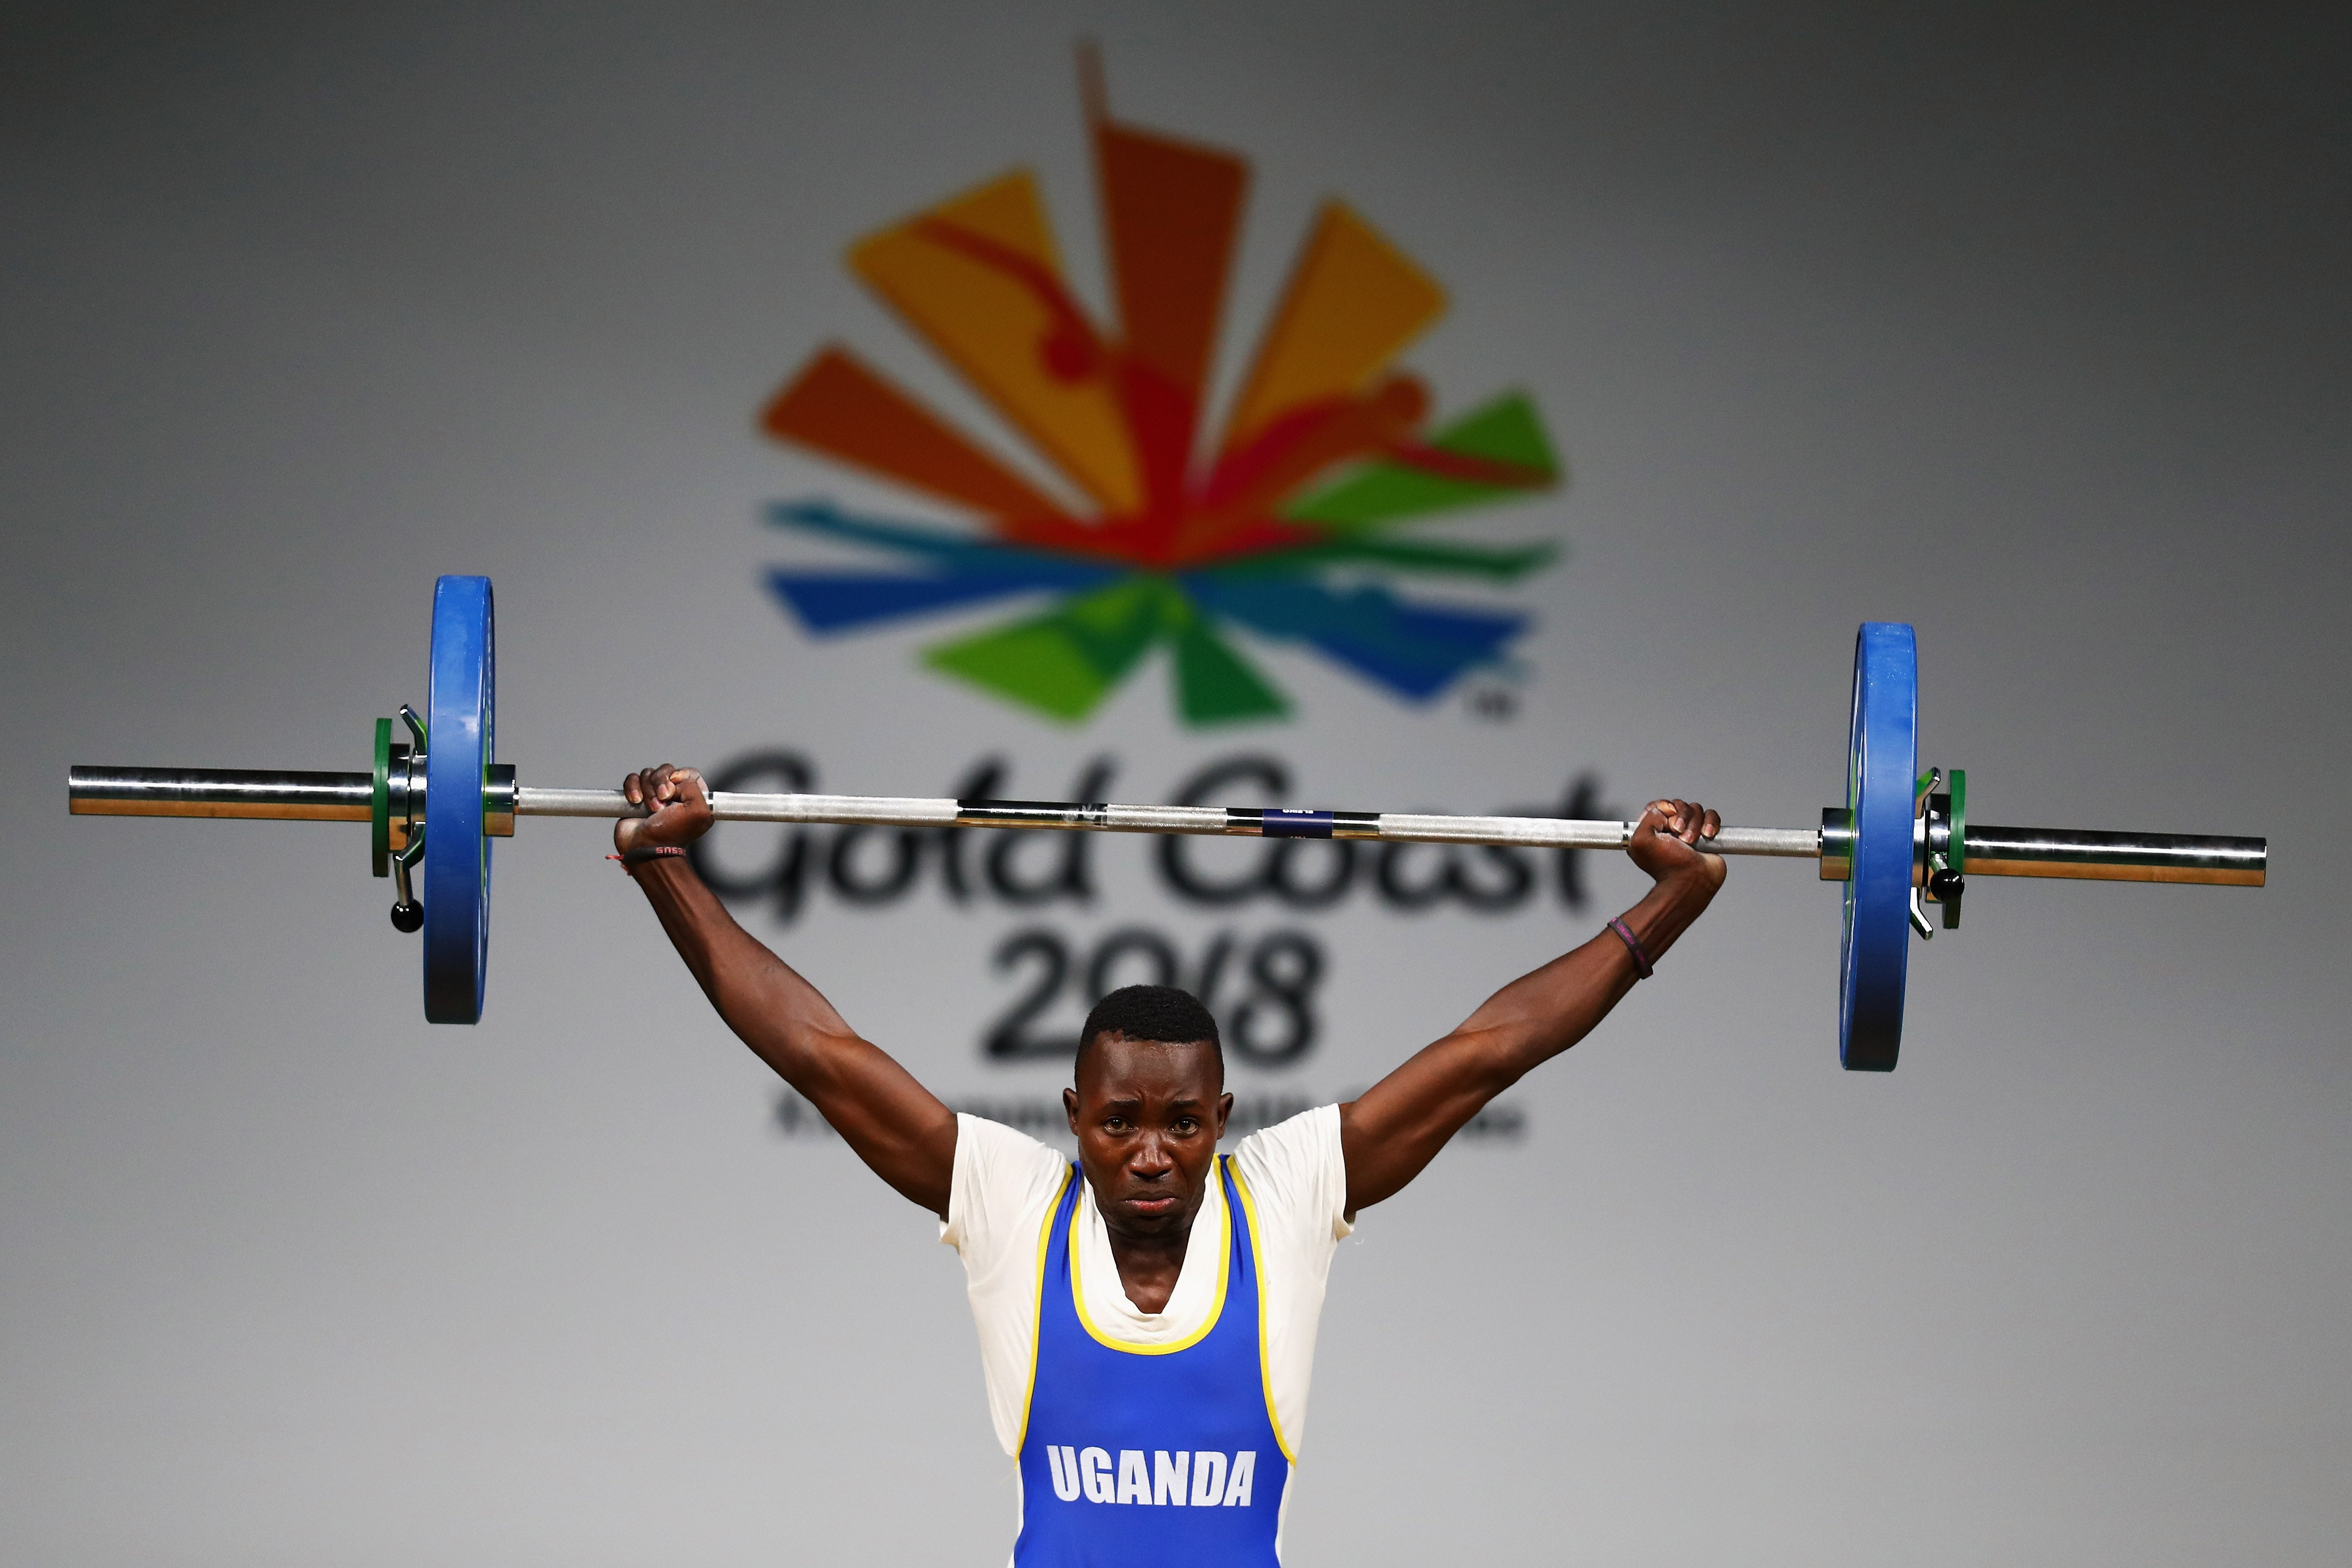 Julius Ssekitoleko of Uganda competes during the Weightlifting Men's 56kg Final on day one of the Gold Coast 2018 Commonwealth Games at Carrara Sports and Leisure Centre on April 5, 2018 on the Gold Coast, Australia.